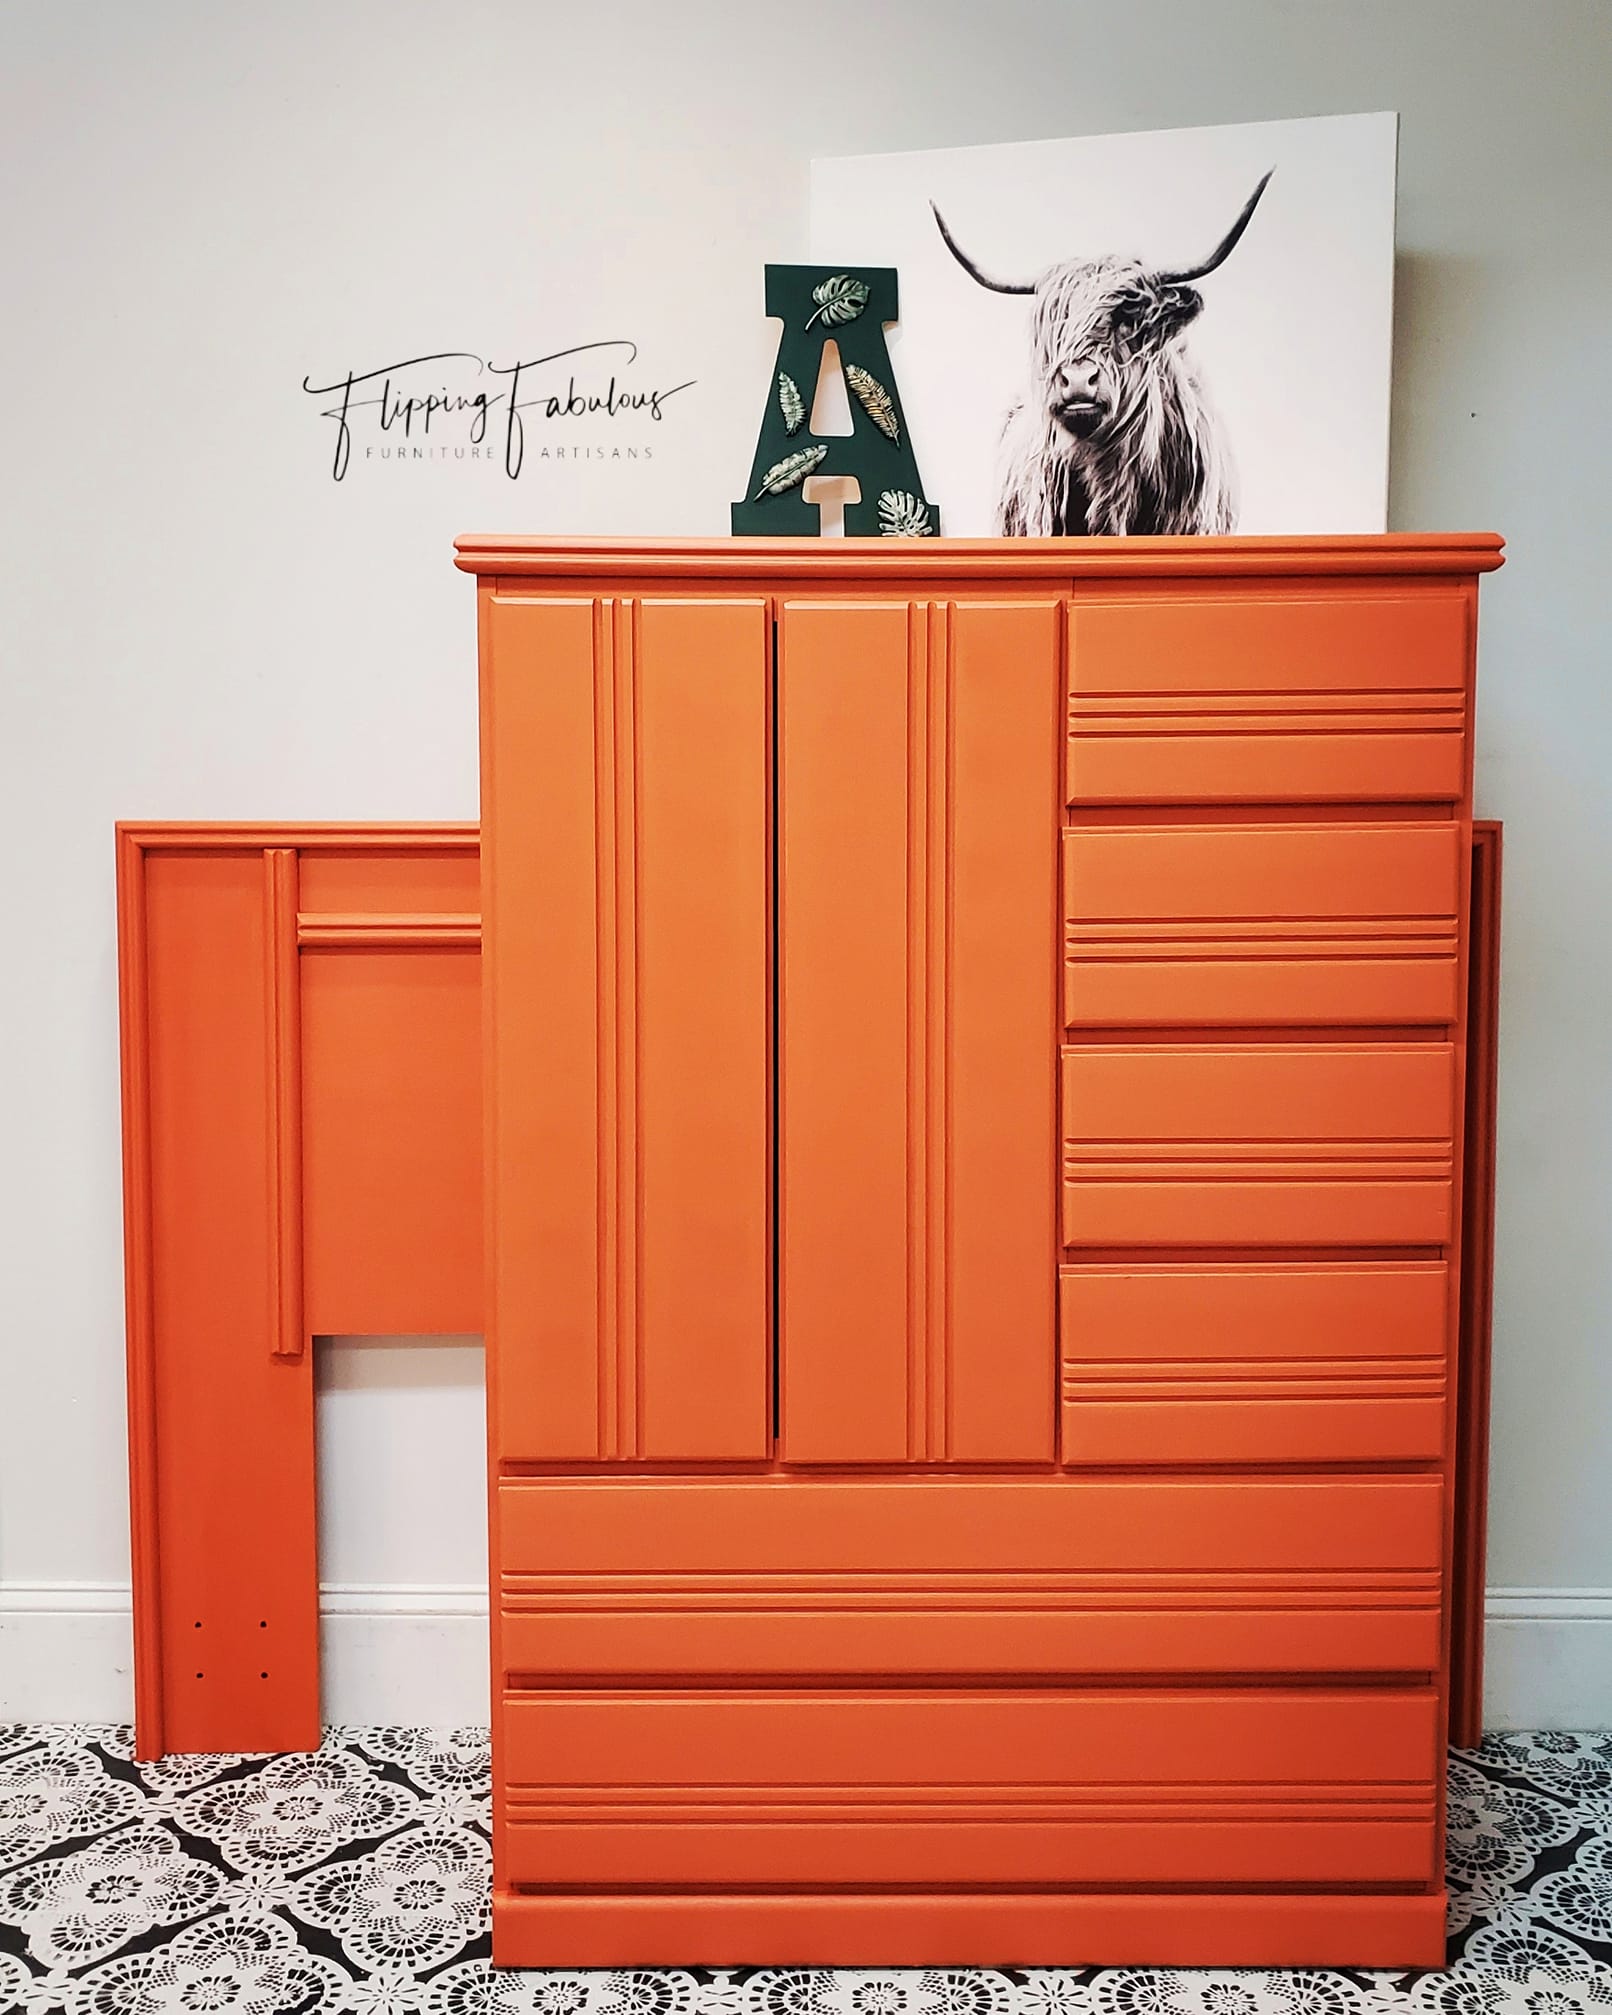 Tuscan Orange - Limited Release By Fusion Mineral Paint - Blue Star Antiques